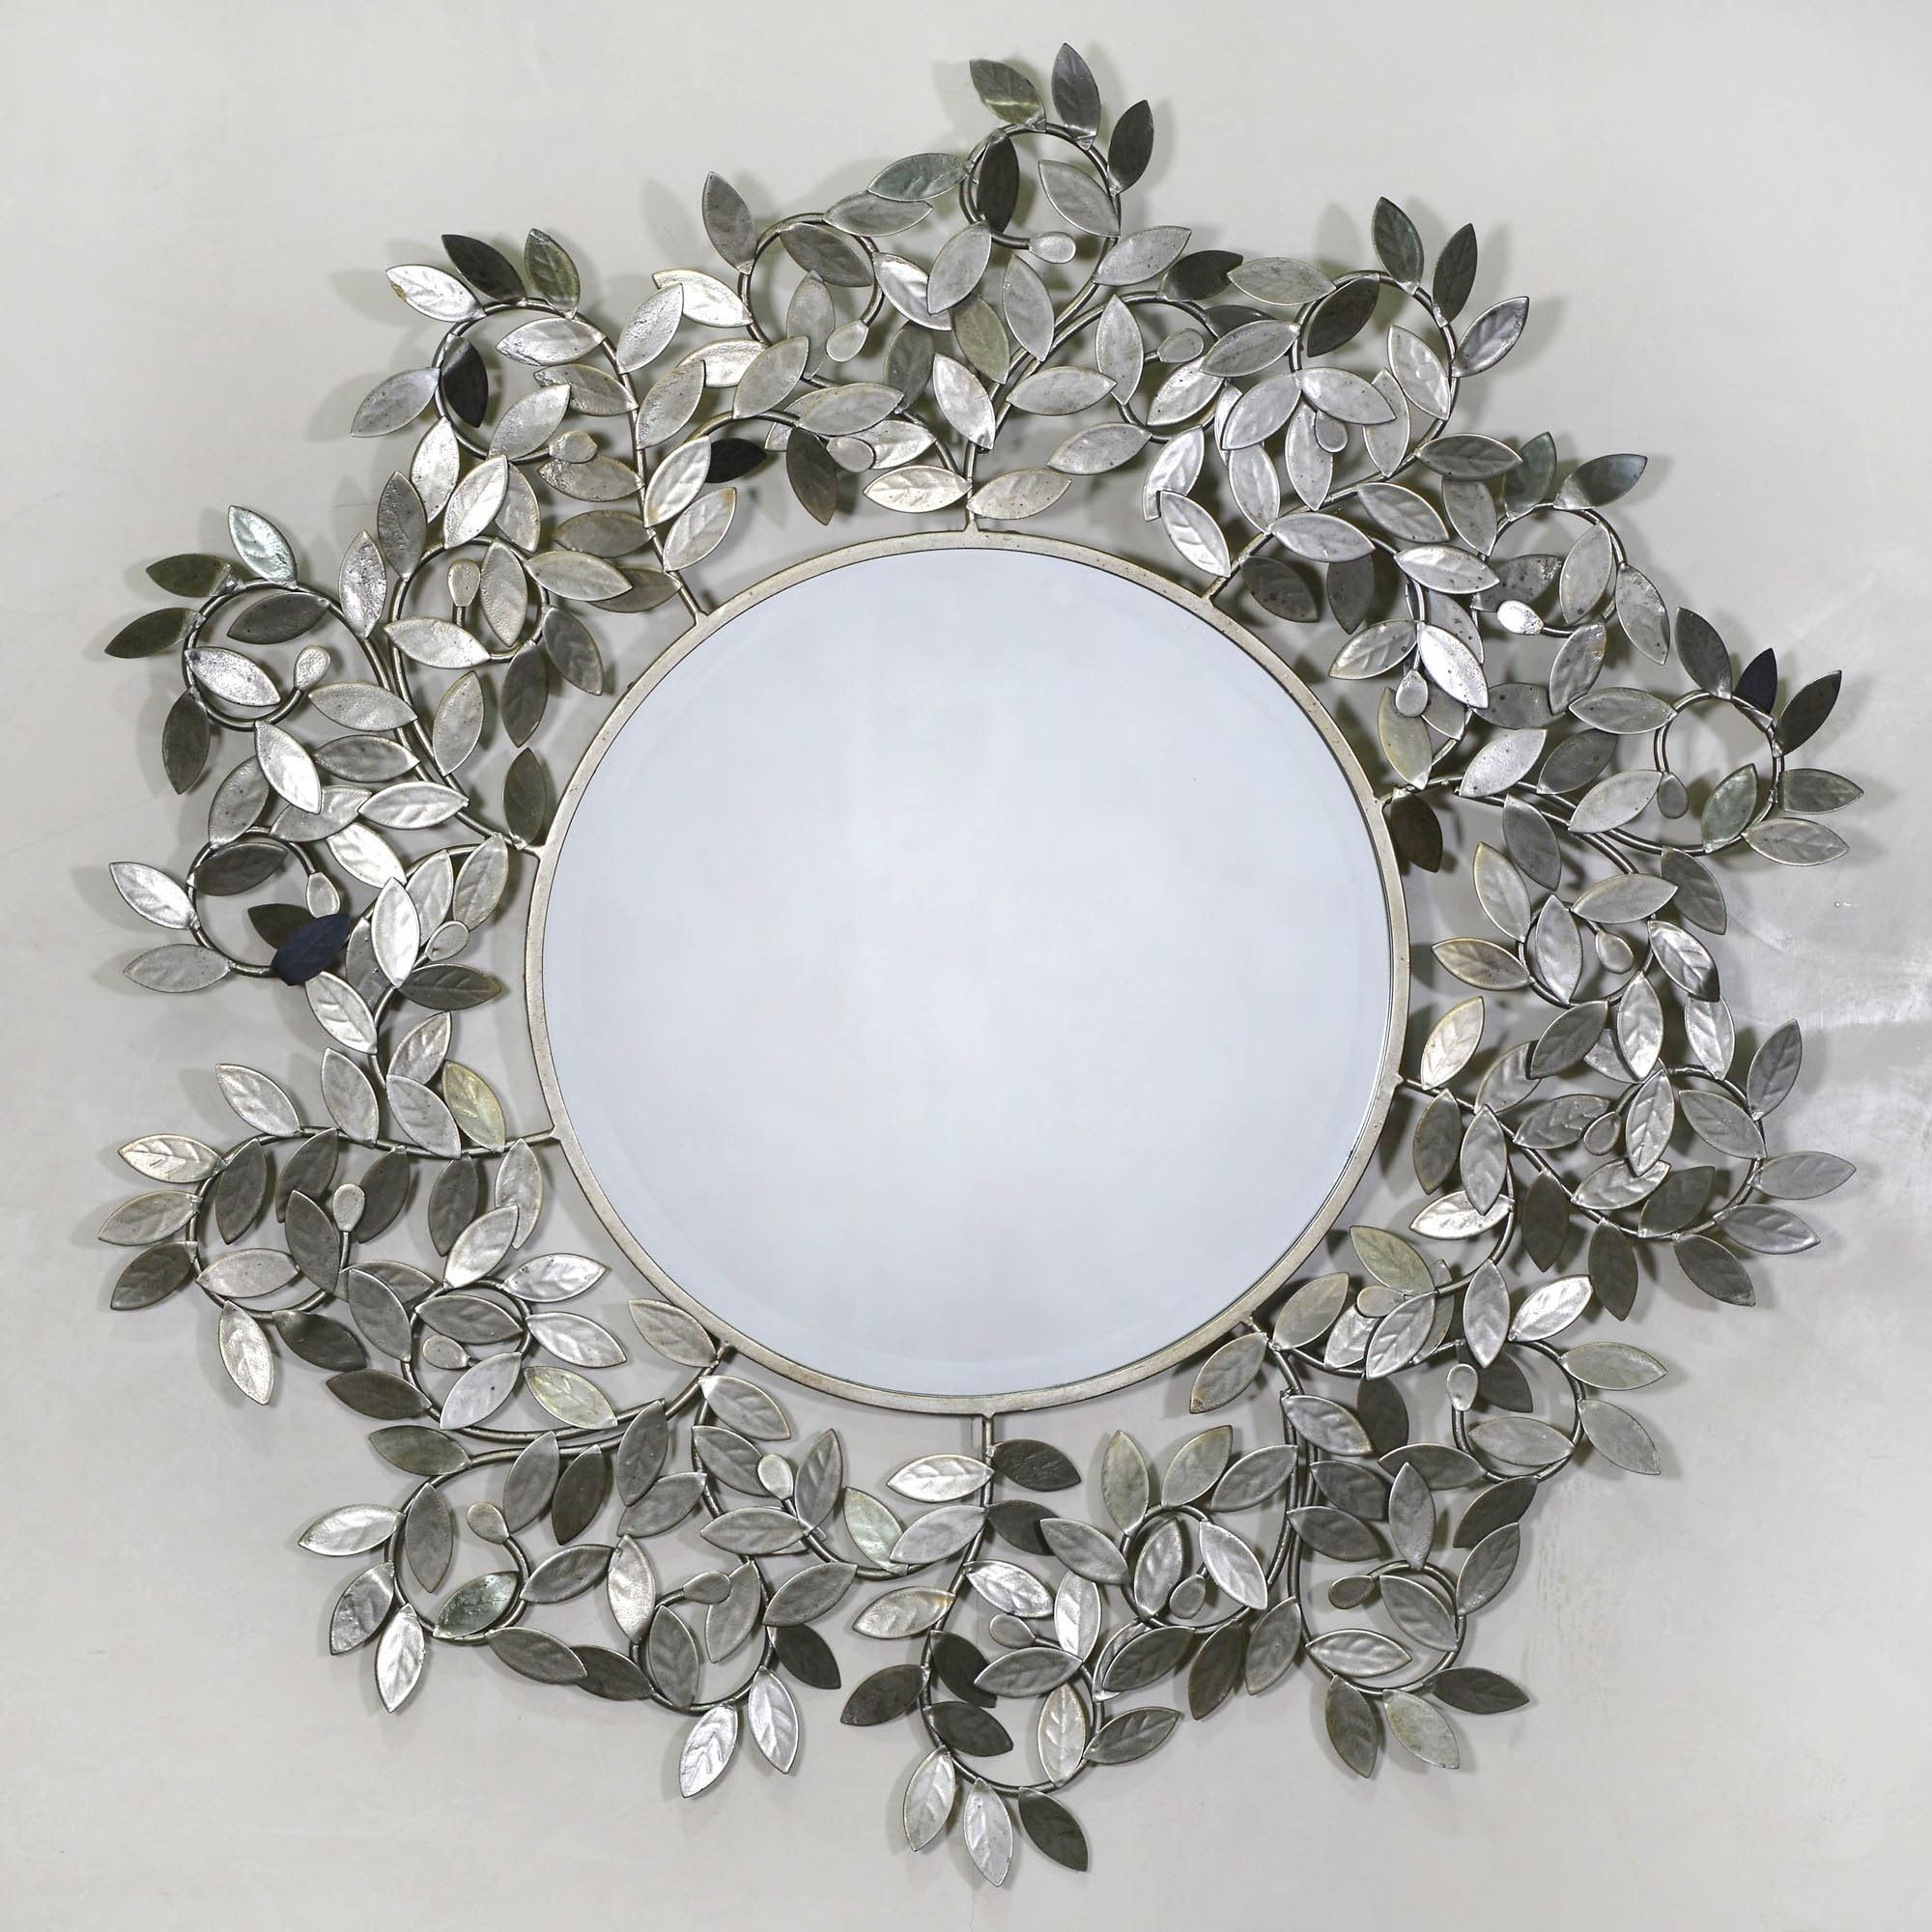 Antique Silver Rose Leaf Metal Framed Wall Mirror | Contemporary Mirror Within Gold Leaf And Black Wall Mirrors (View 10 of 15)